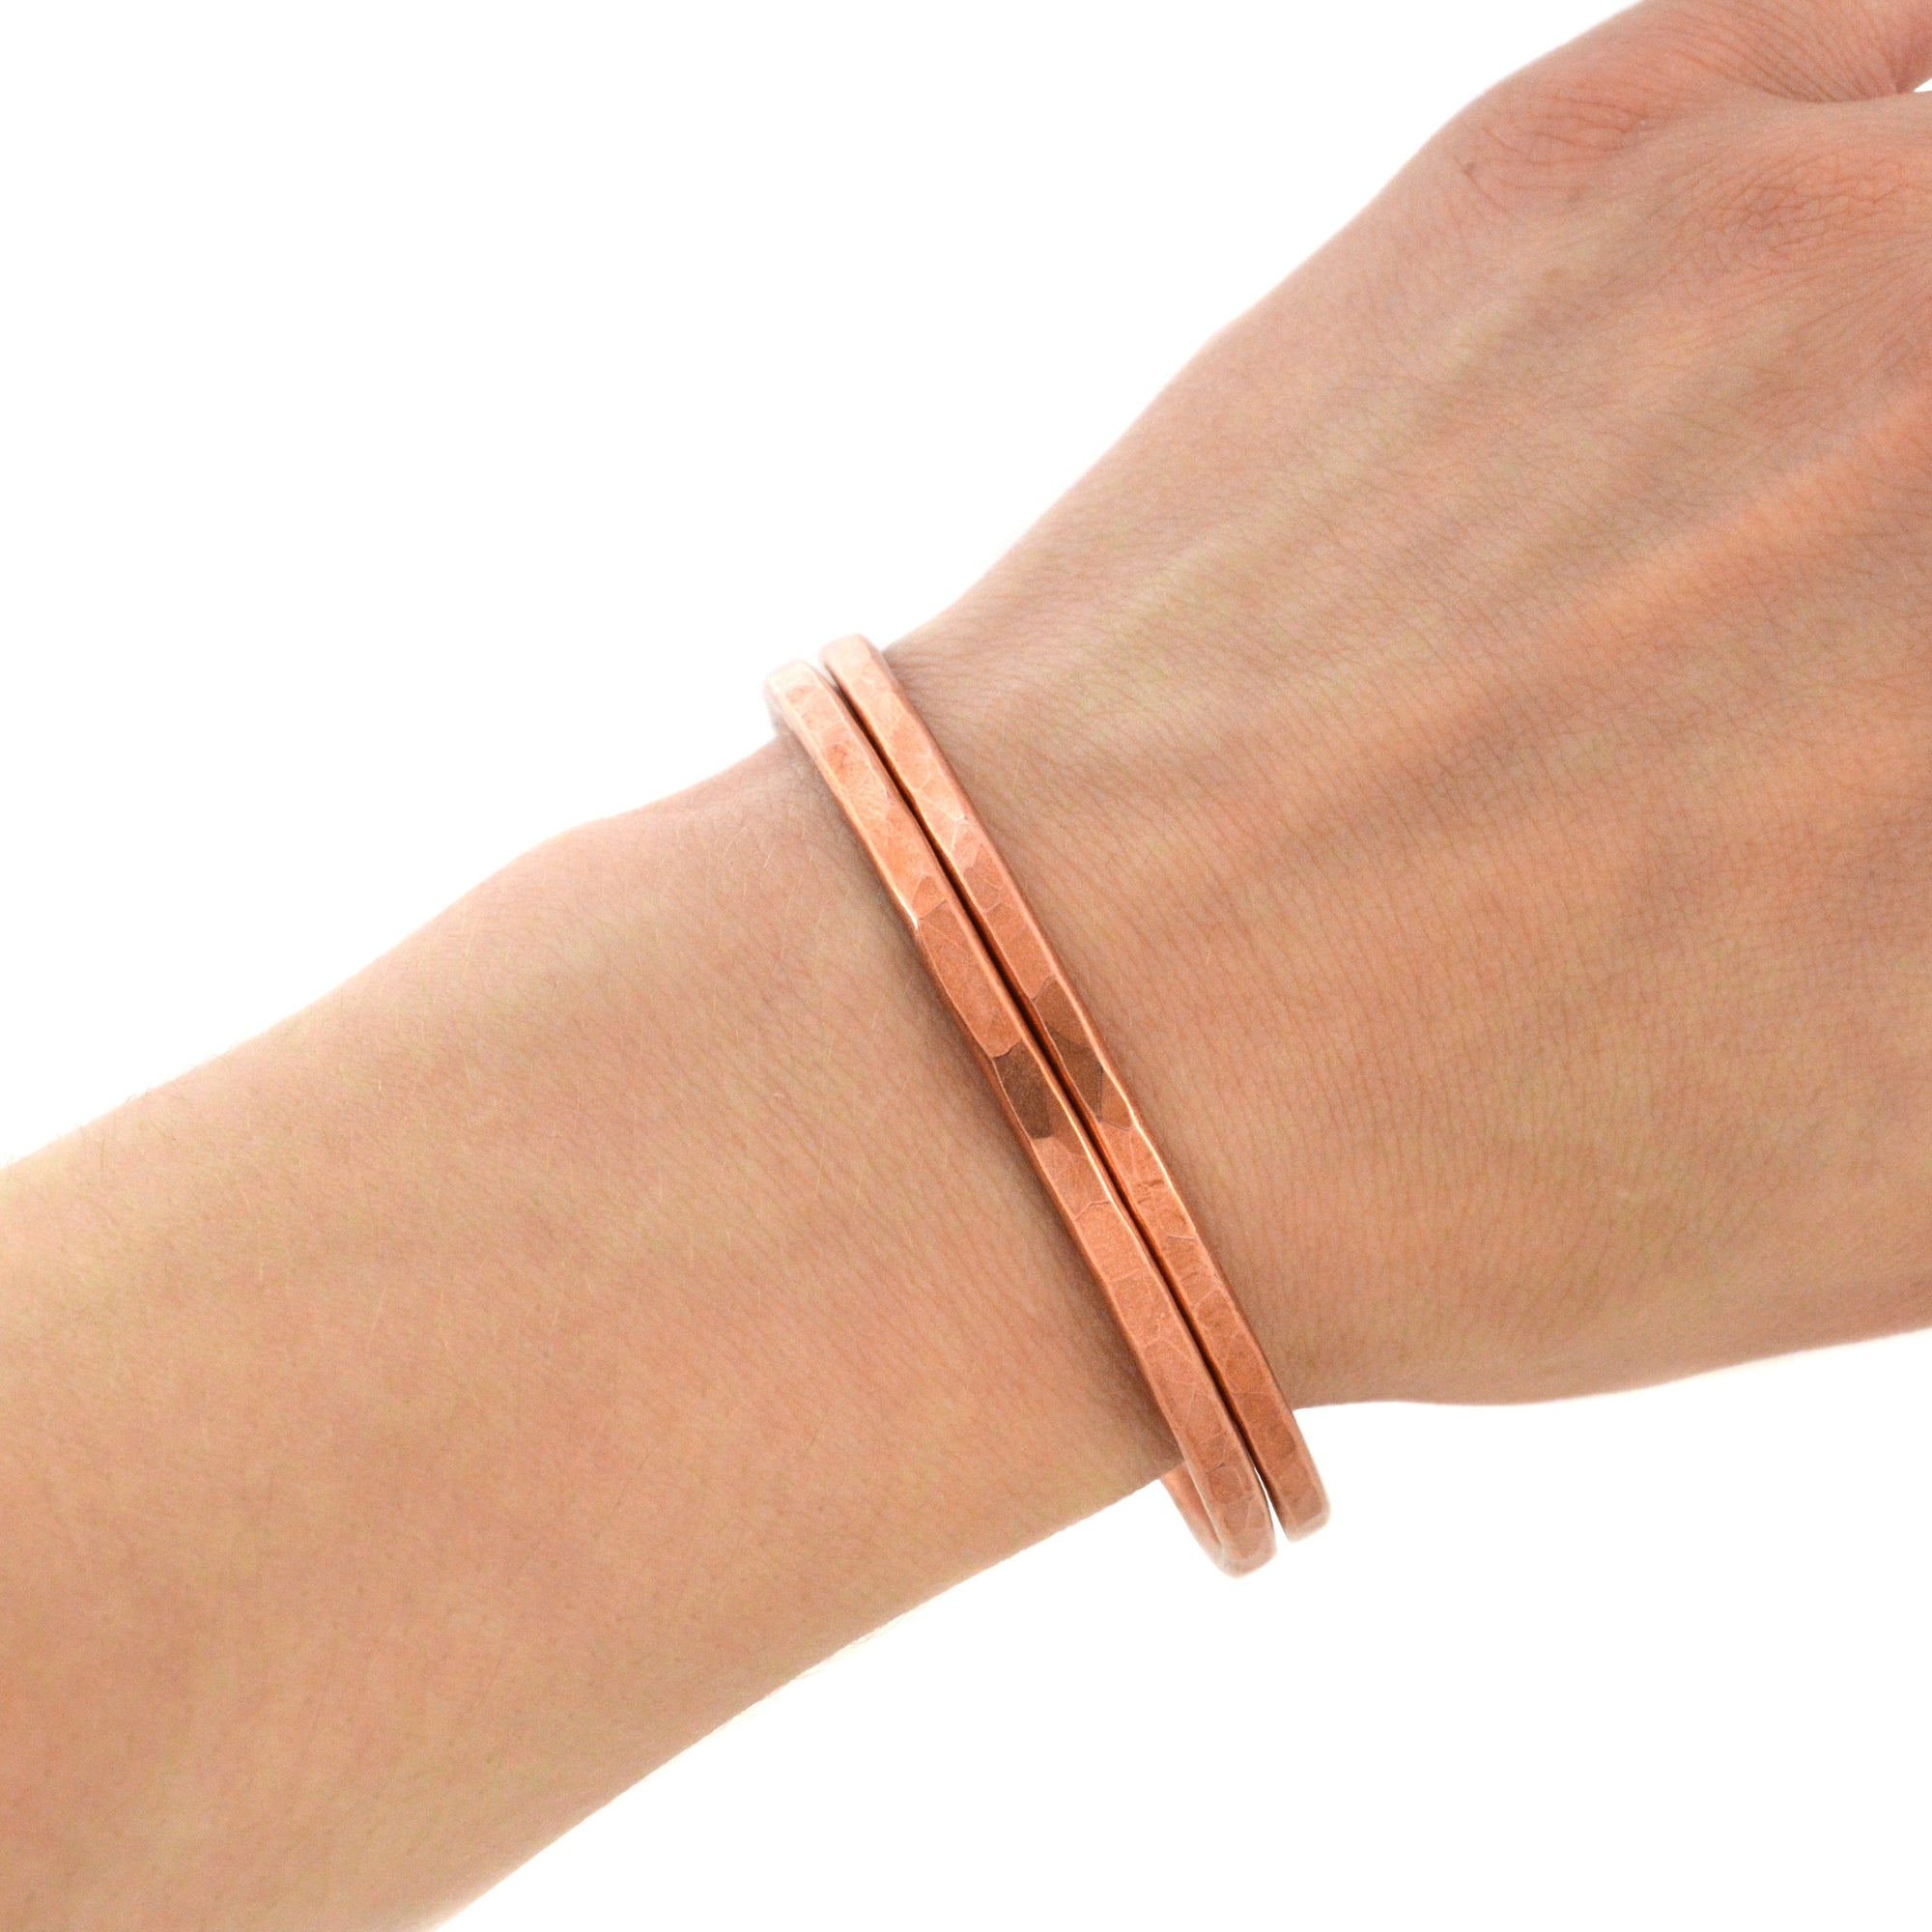 Thick Copper Hammered Bangle - Bracelet  Small  Medium 3773 - handmade by Beth Millner Jewelry